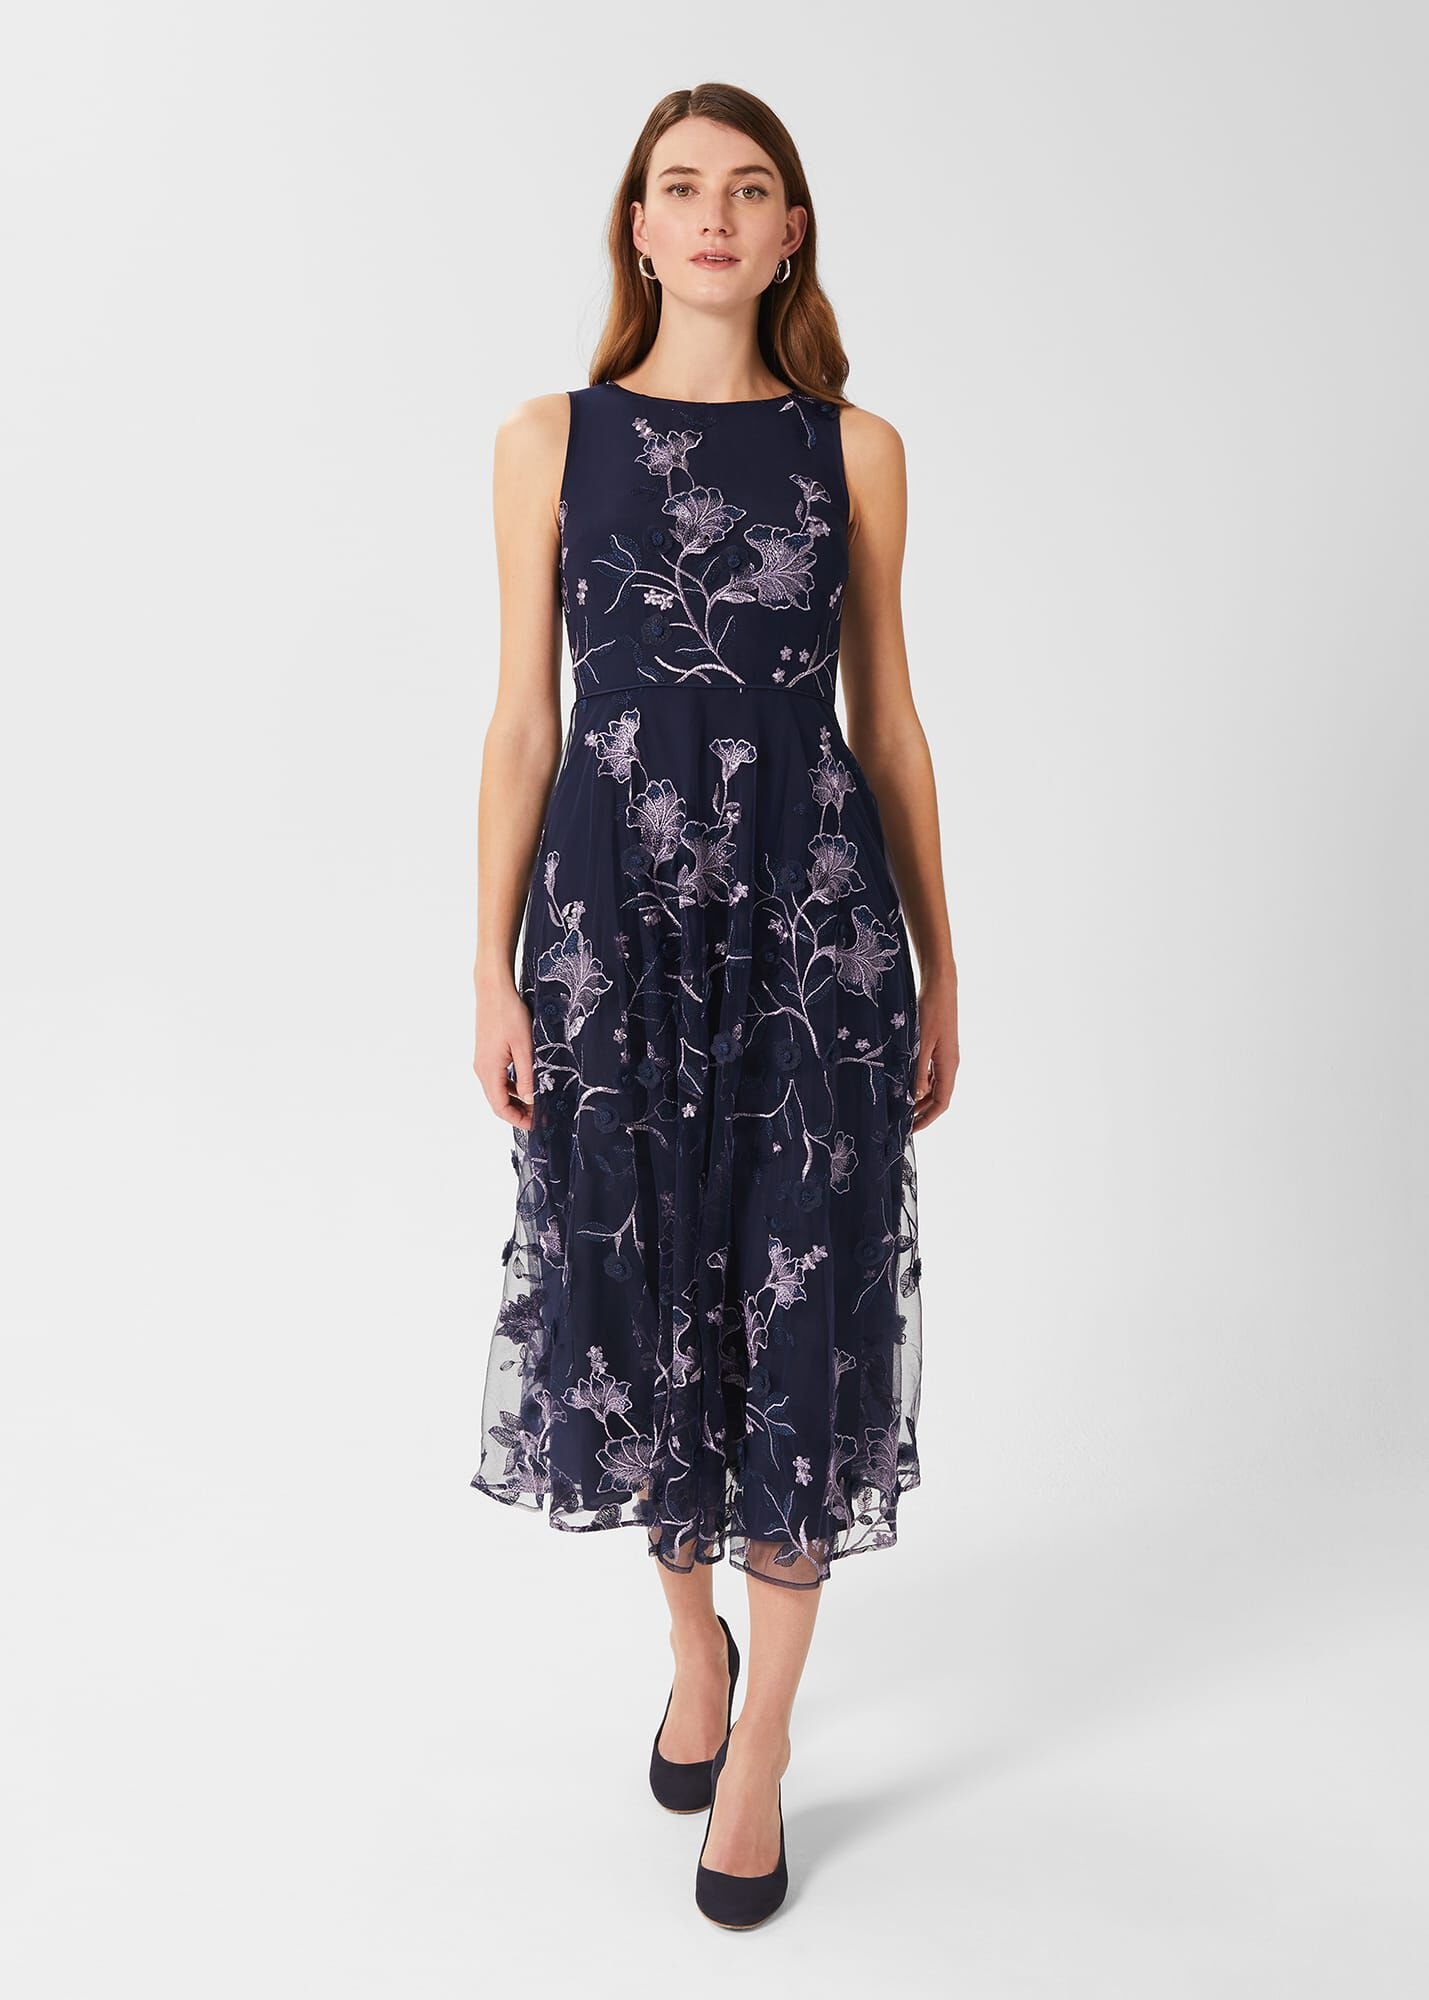 Hobbs London Myla Floral Dress Blue Embroidered Tulle Fabric Occasionwear